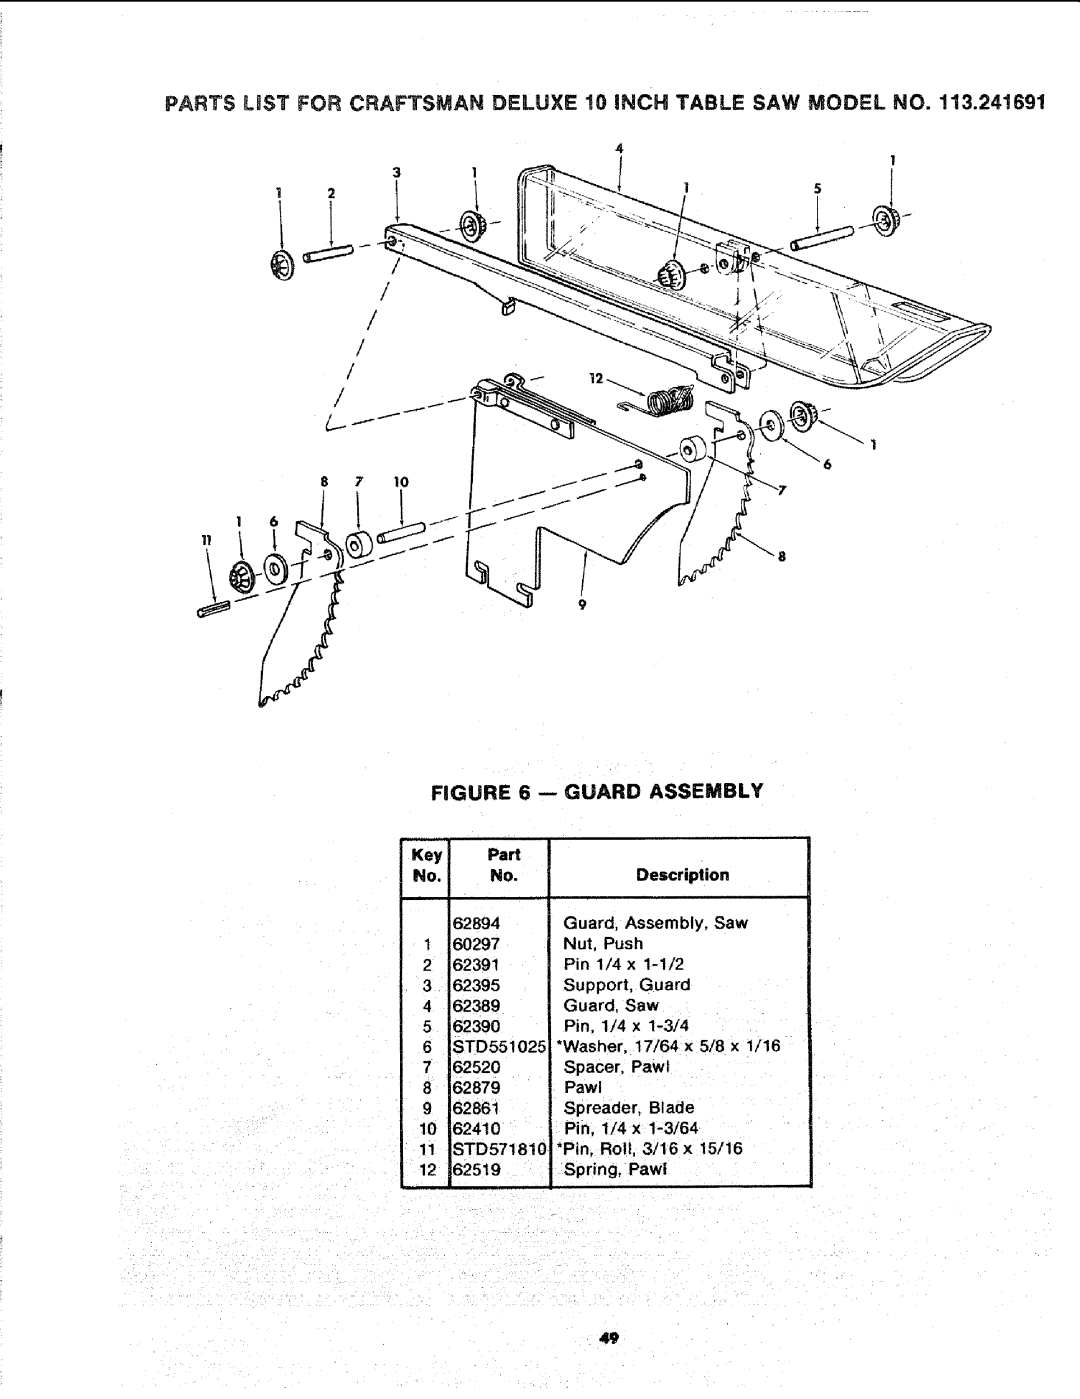 Sears 113.241591 owner manual PARTS LIST FOR CRAFTSMAN DELUXE 10 iNCH TABLE SAW MODEL NO, Guard 